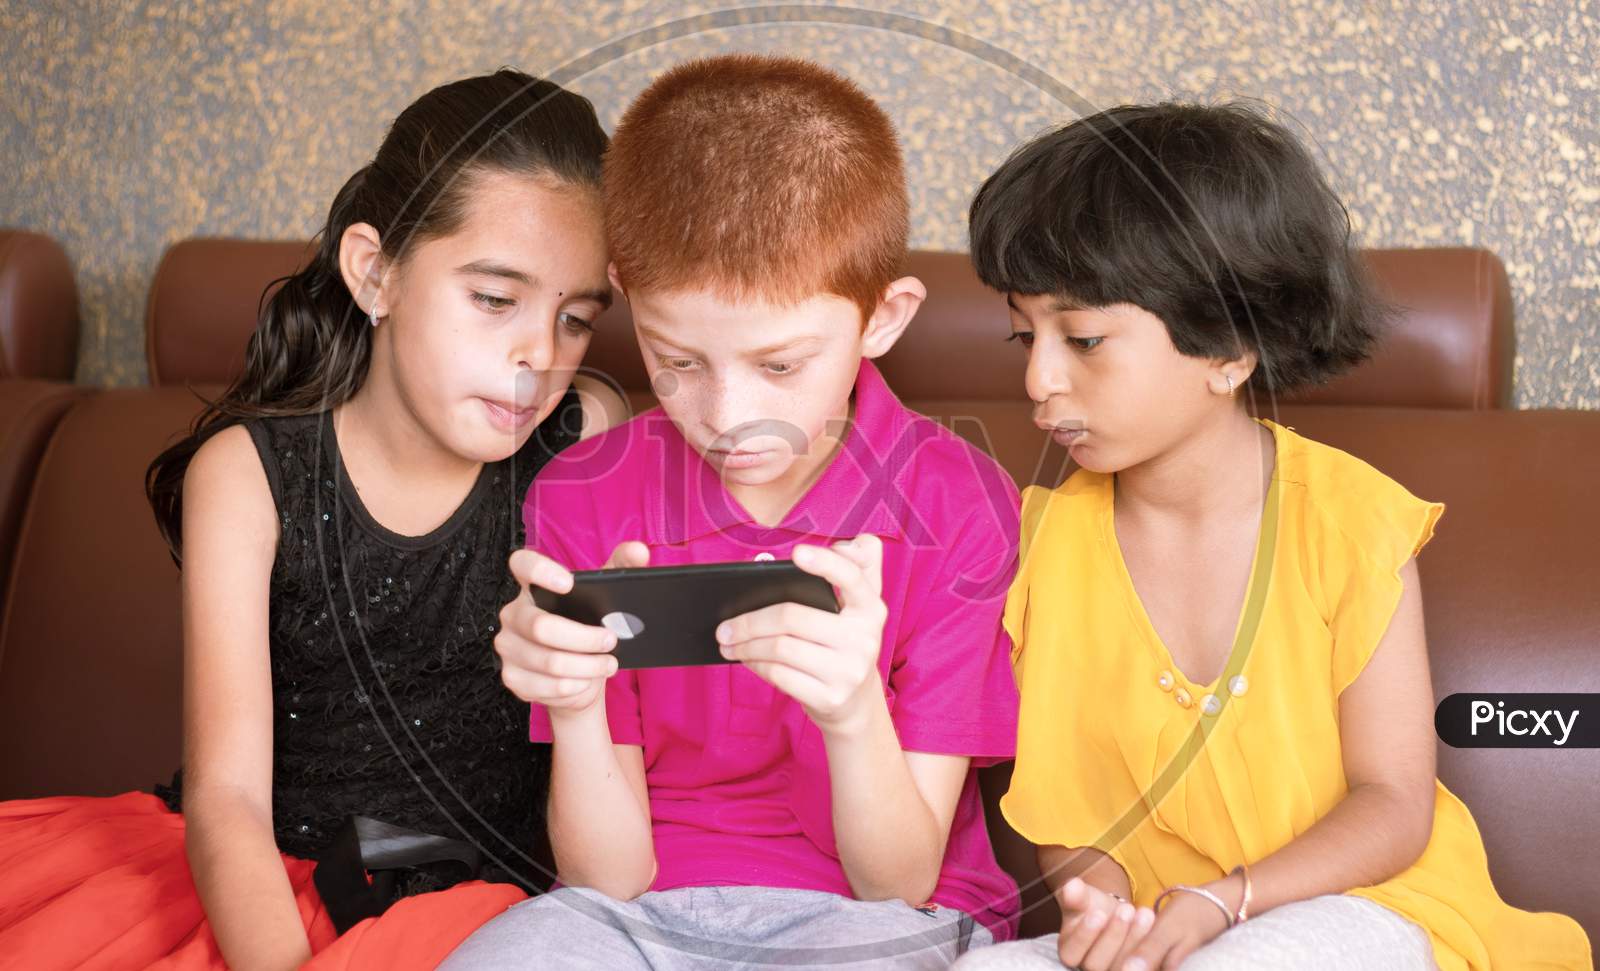 Group of Kids using Mobile Phone or Smartphone